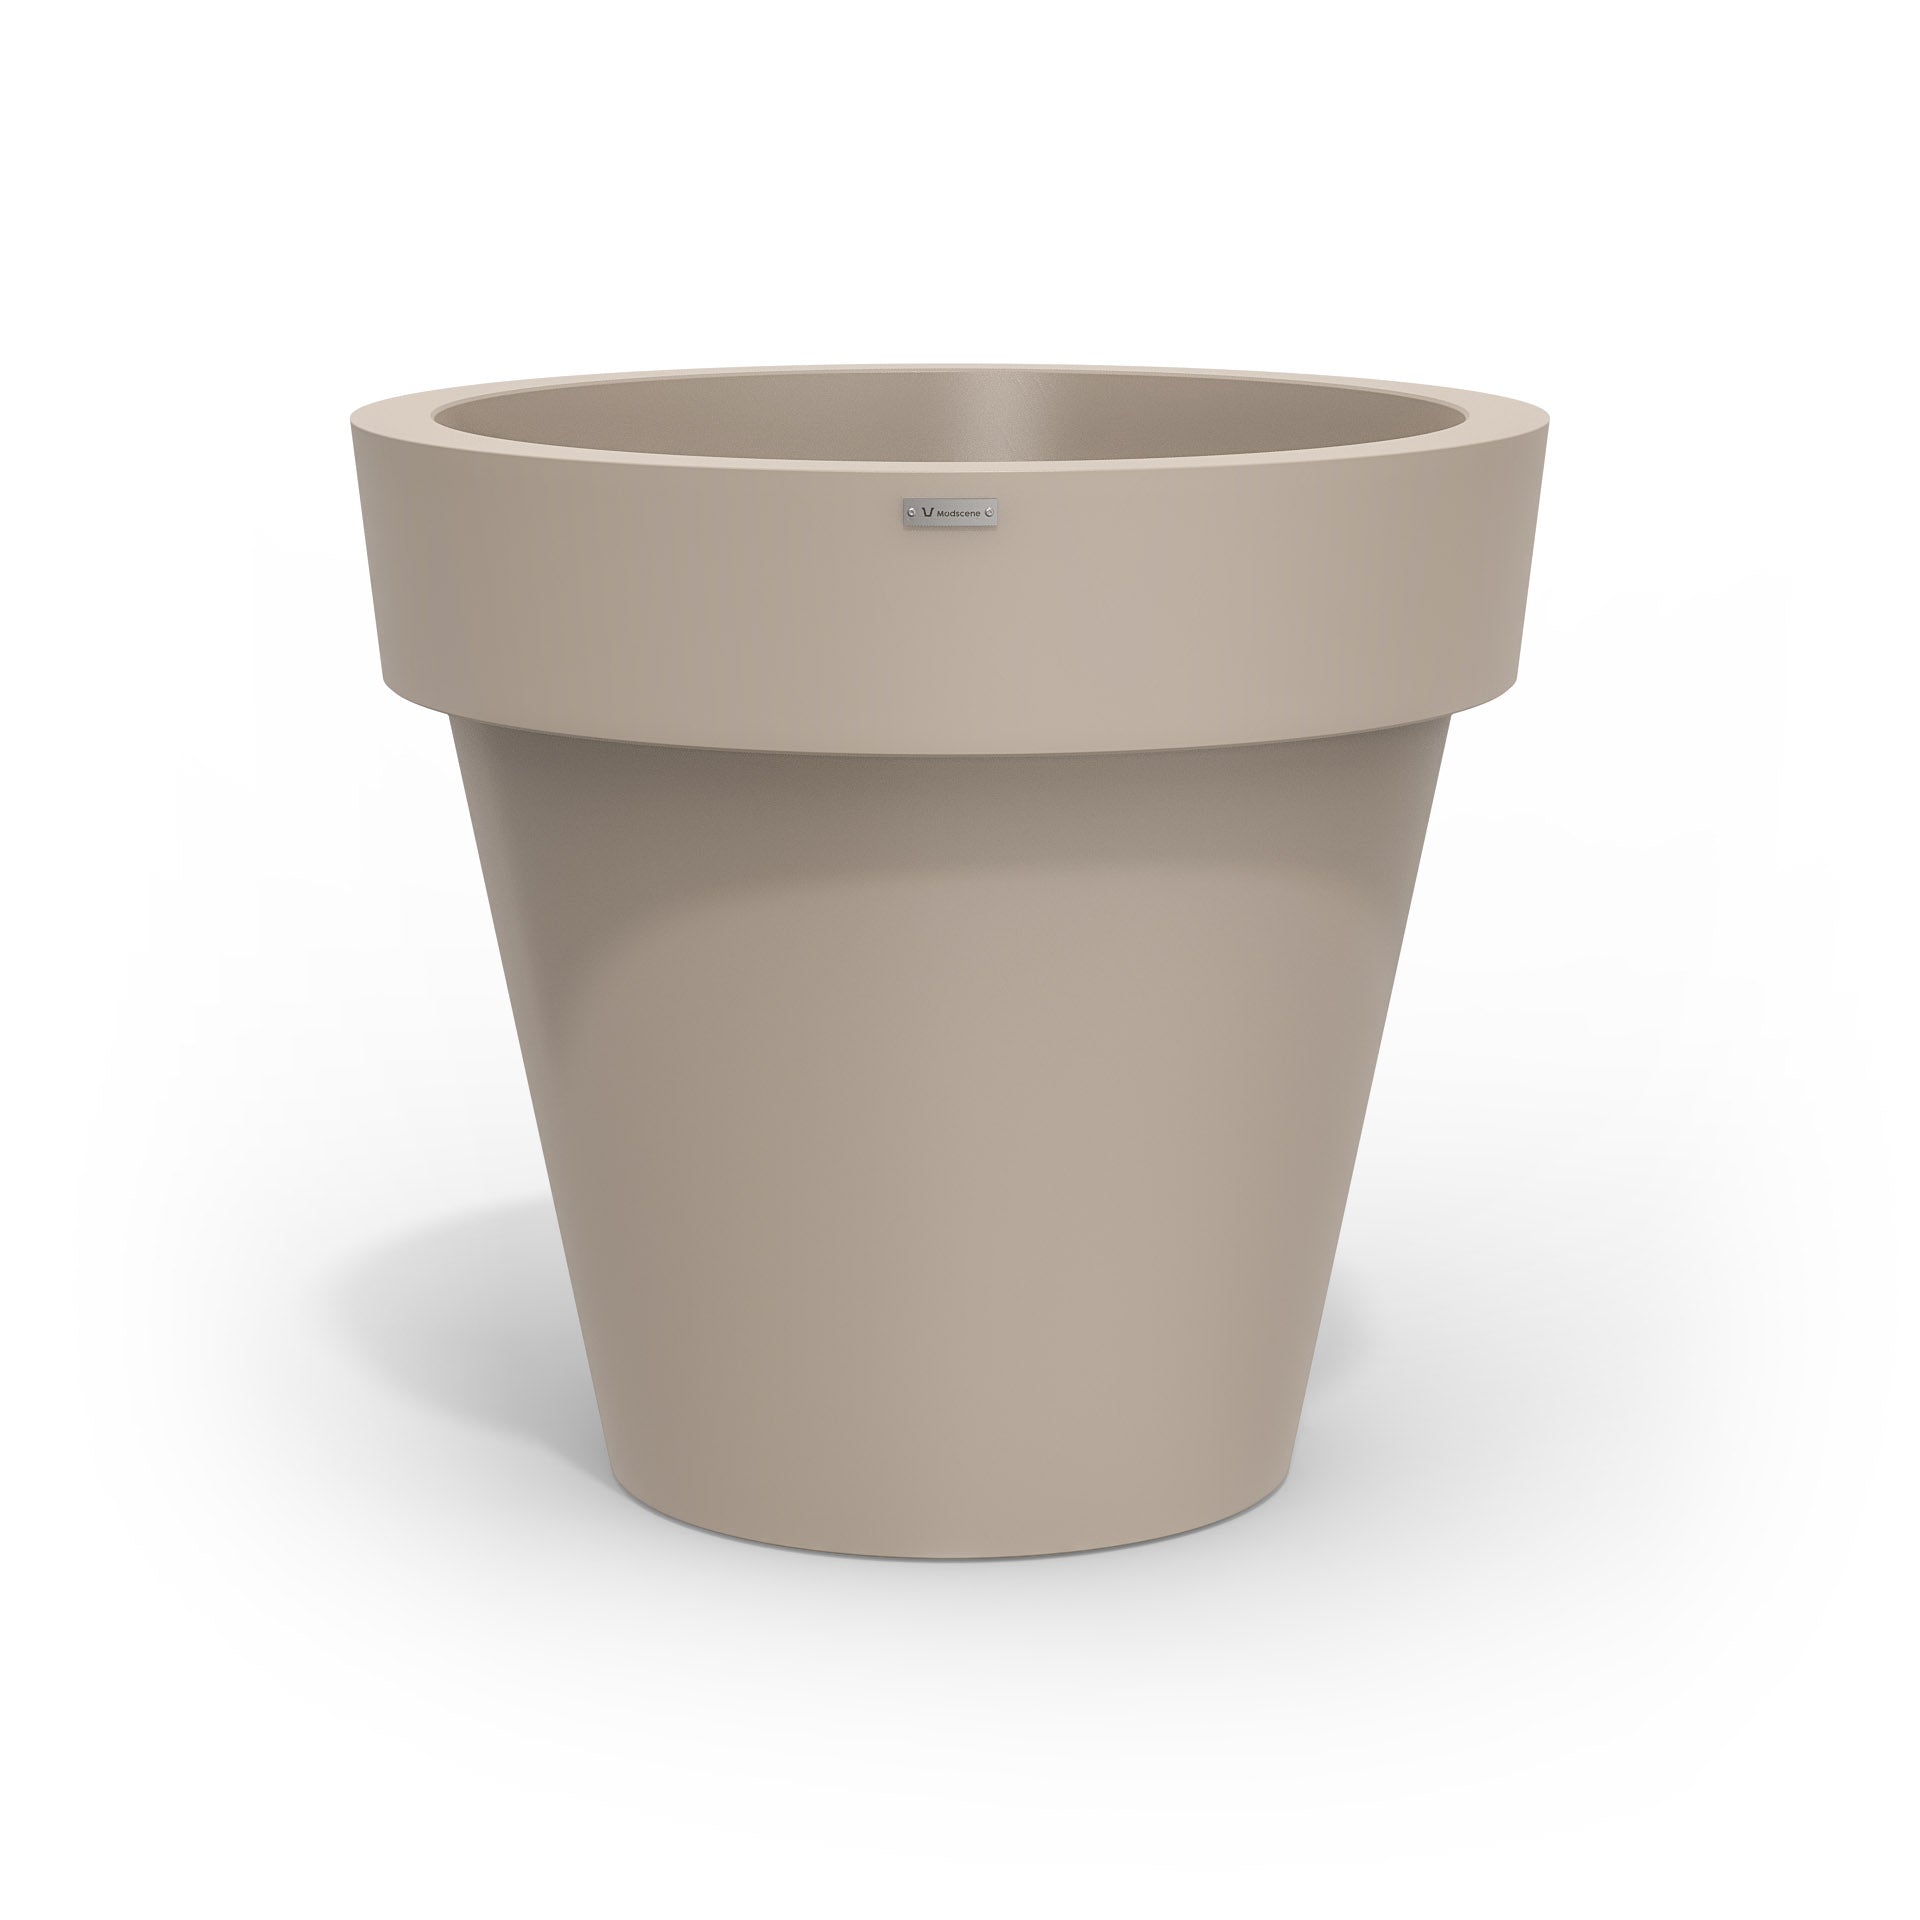 A large planter pot in a sandstone colour made by Modscene NZ.